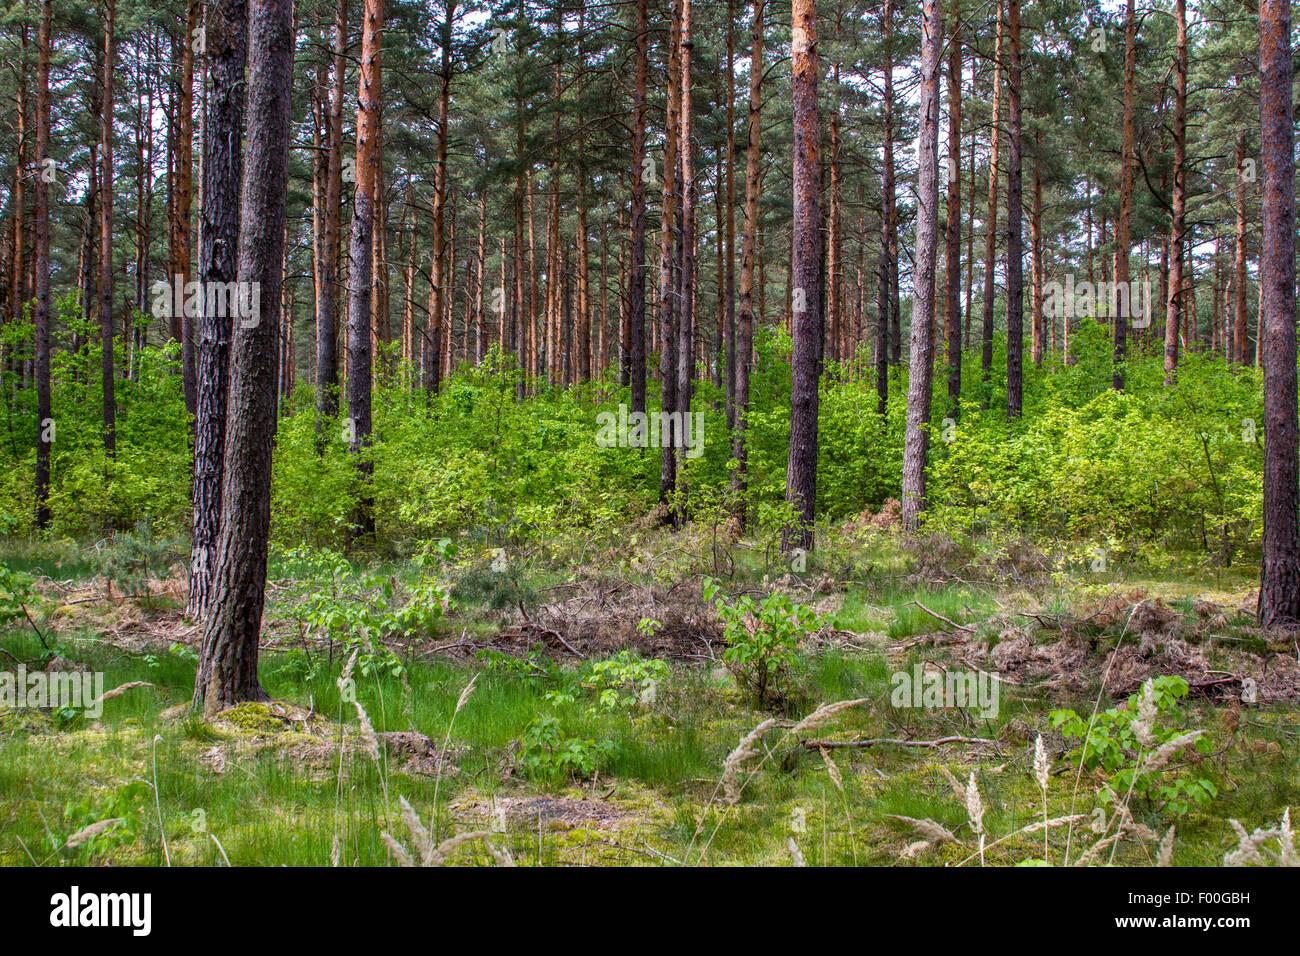 Scotch pine, Scots pine (Pinus sylvestris), pine forest and  young deciduous trees as undergrowth, Germany, Brandenburg, Borkwalde Stock Photo